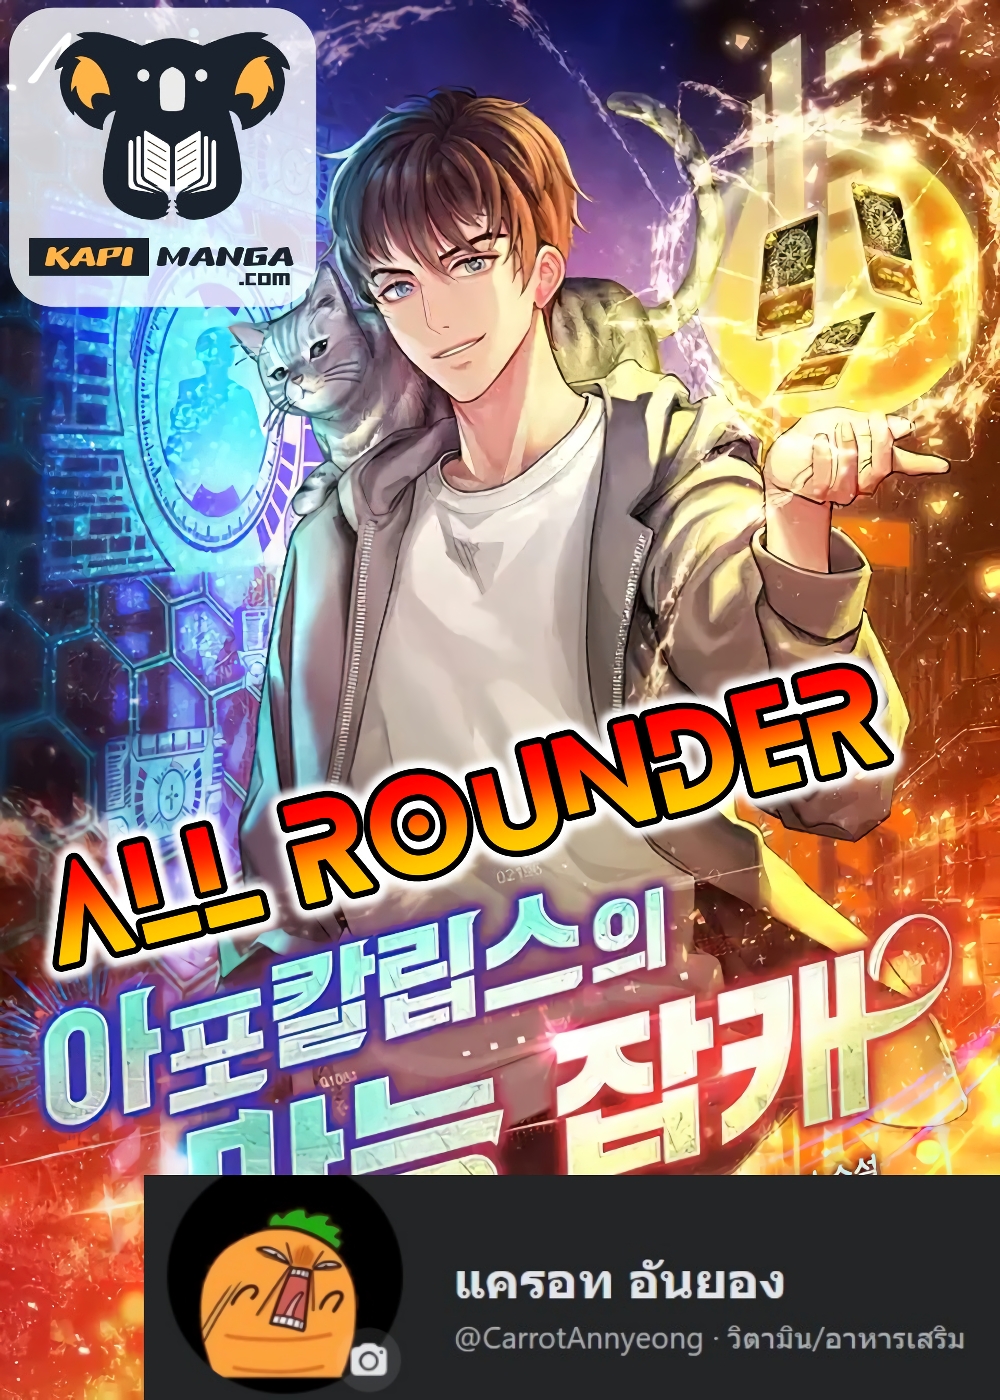 All Rounder 5 (1)